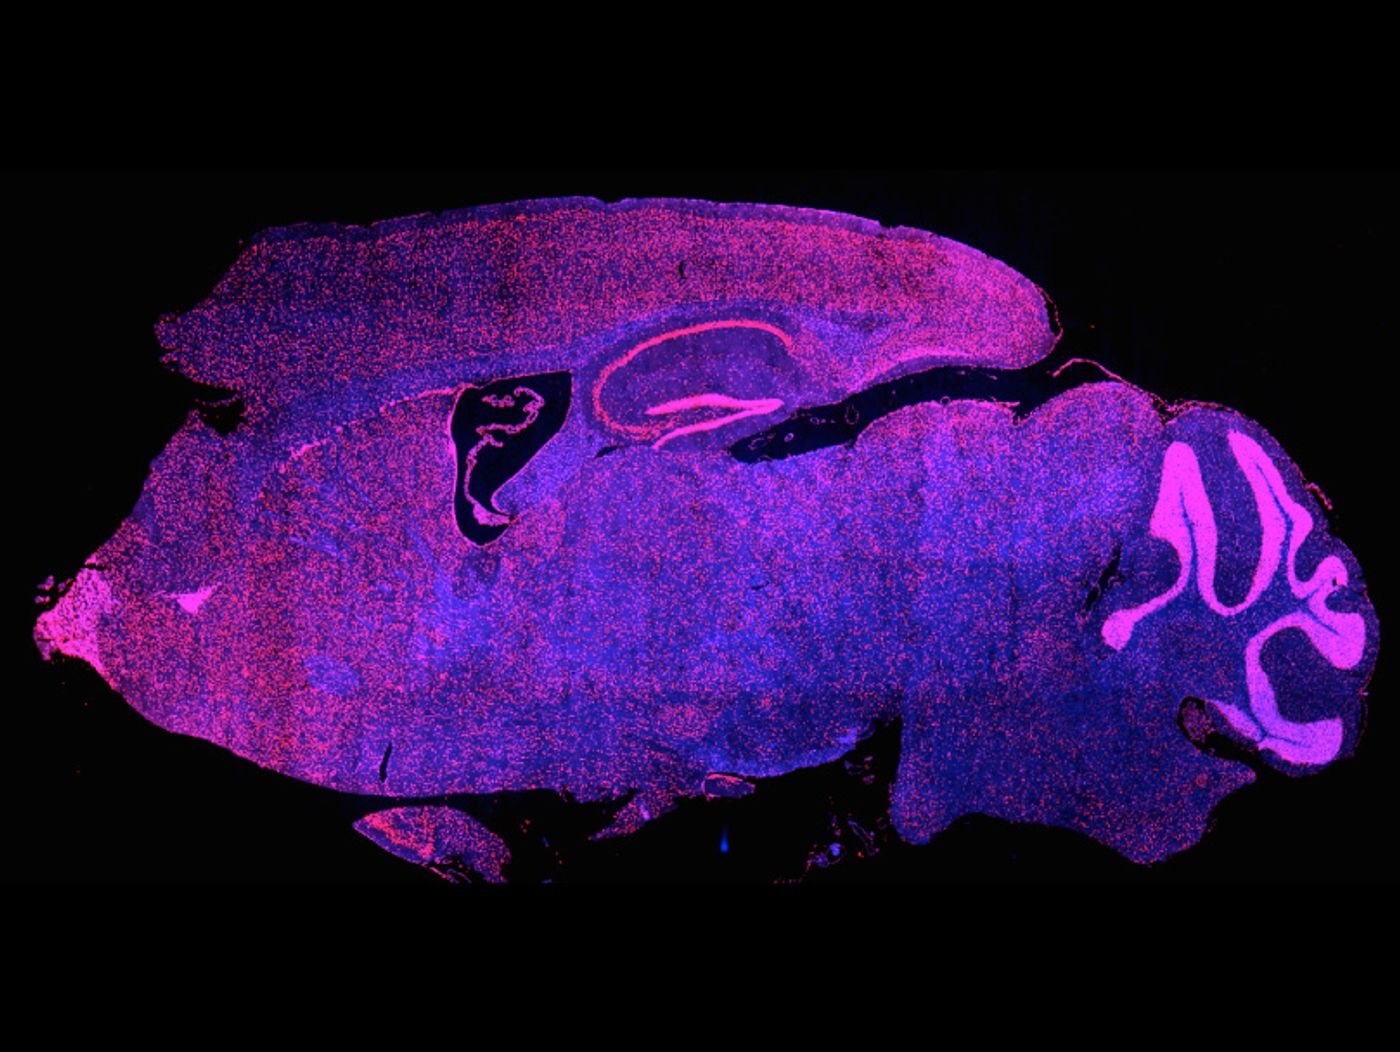 A striking brain presence: Neurons throughout the mouse brain produce Brd4, a protein targeted by some new cancer drugs. In this cross-section of a mouse brain, Brd4-producing cells are stained red but appear purple against a blue stain that labels all cells.